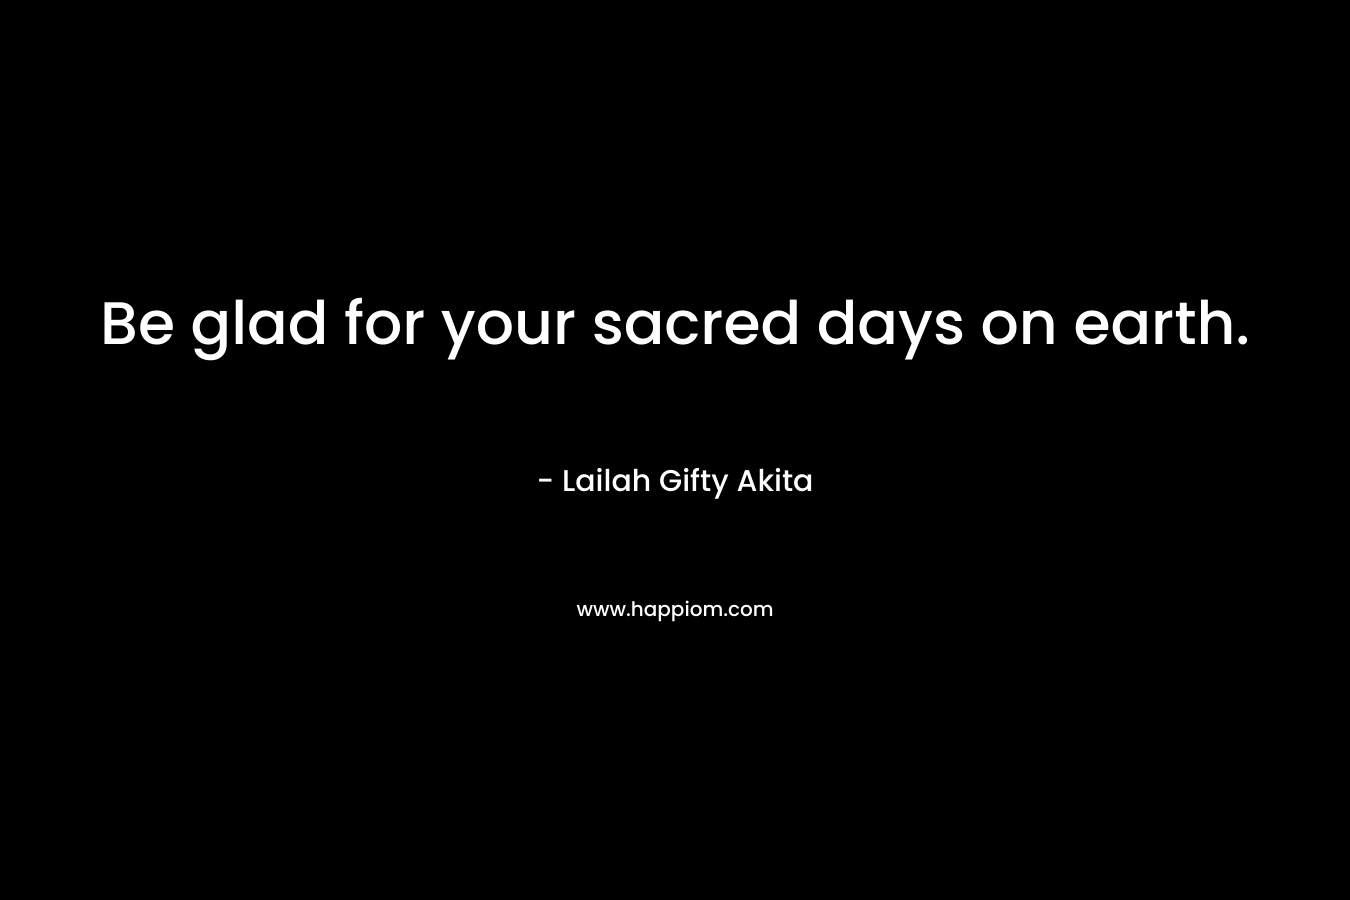 Be glad for your sacred days on earth.